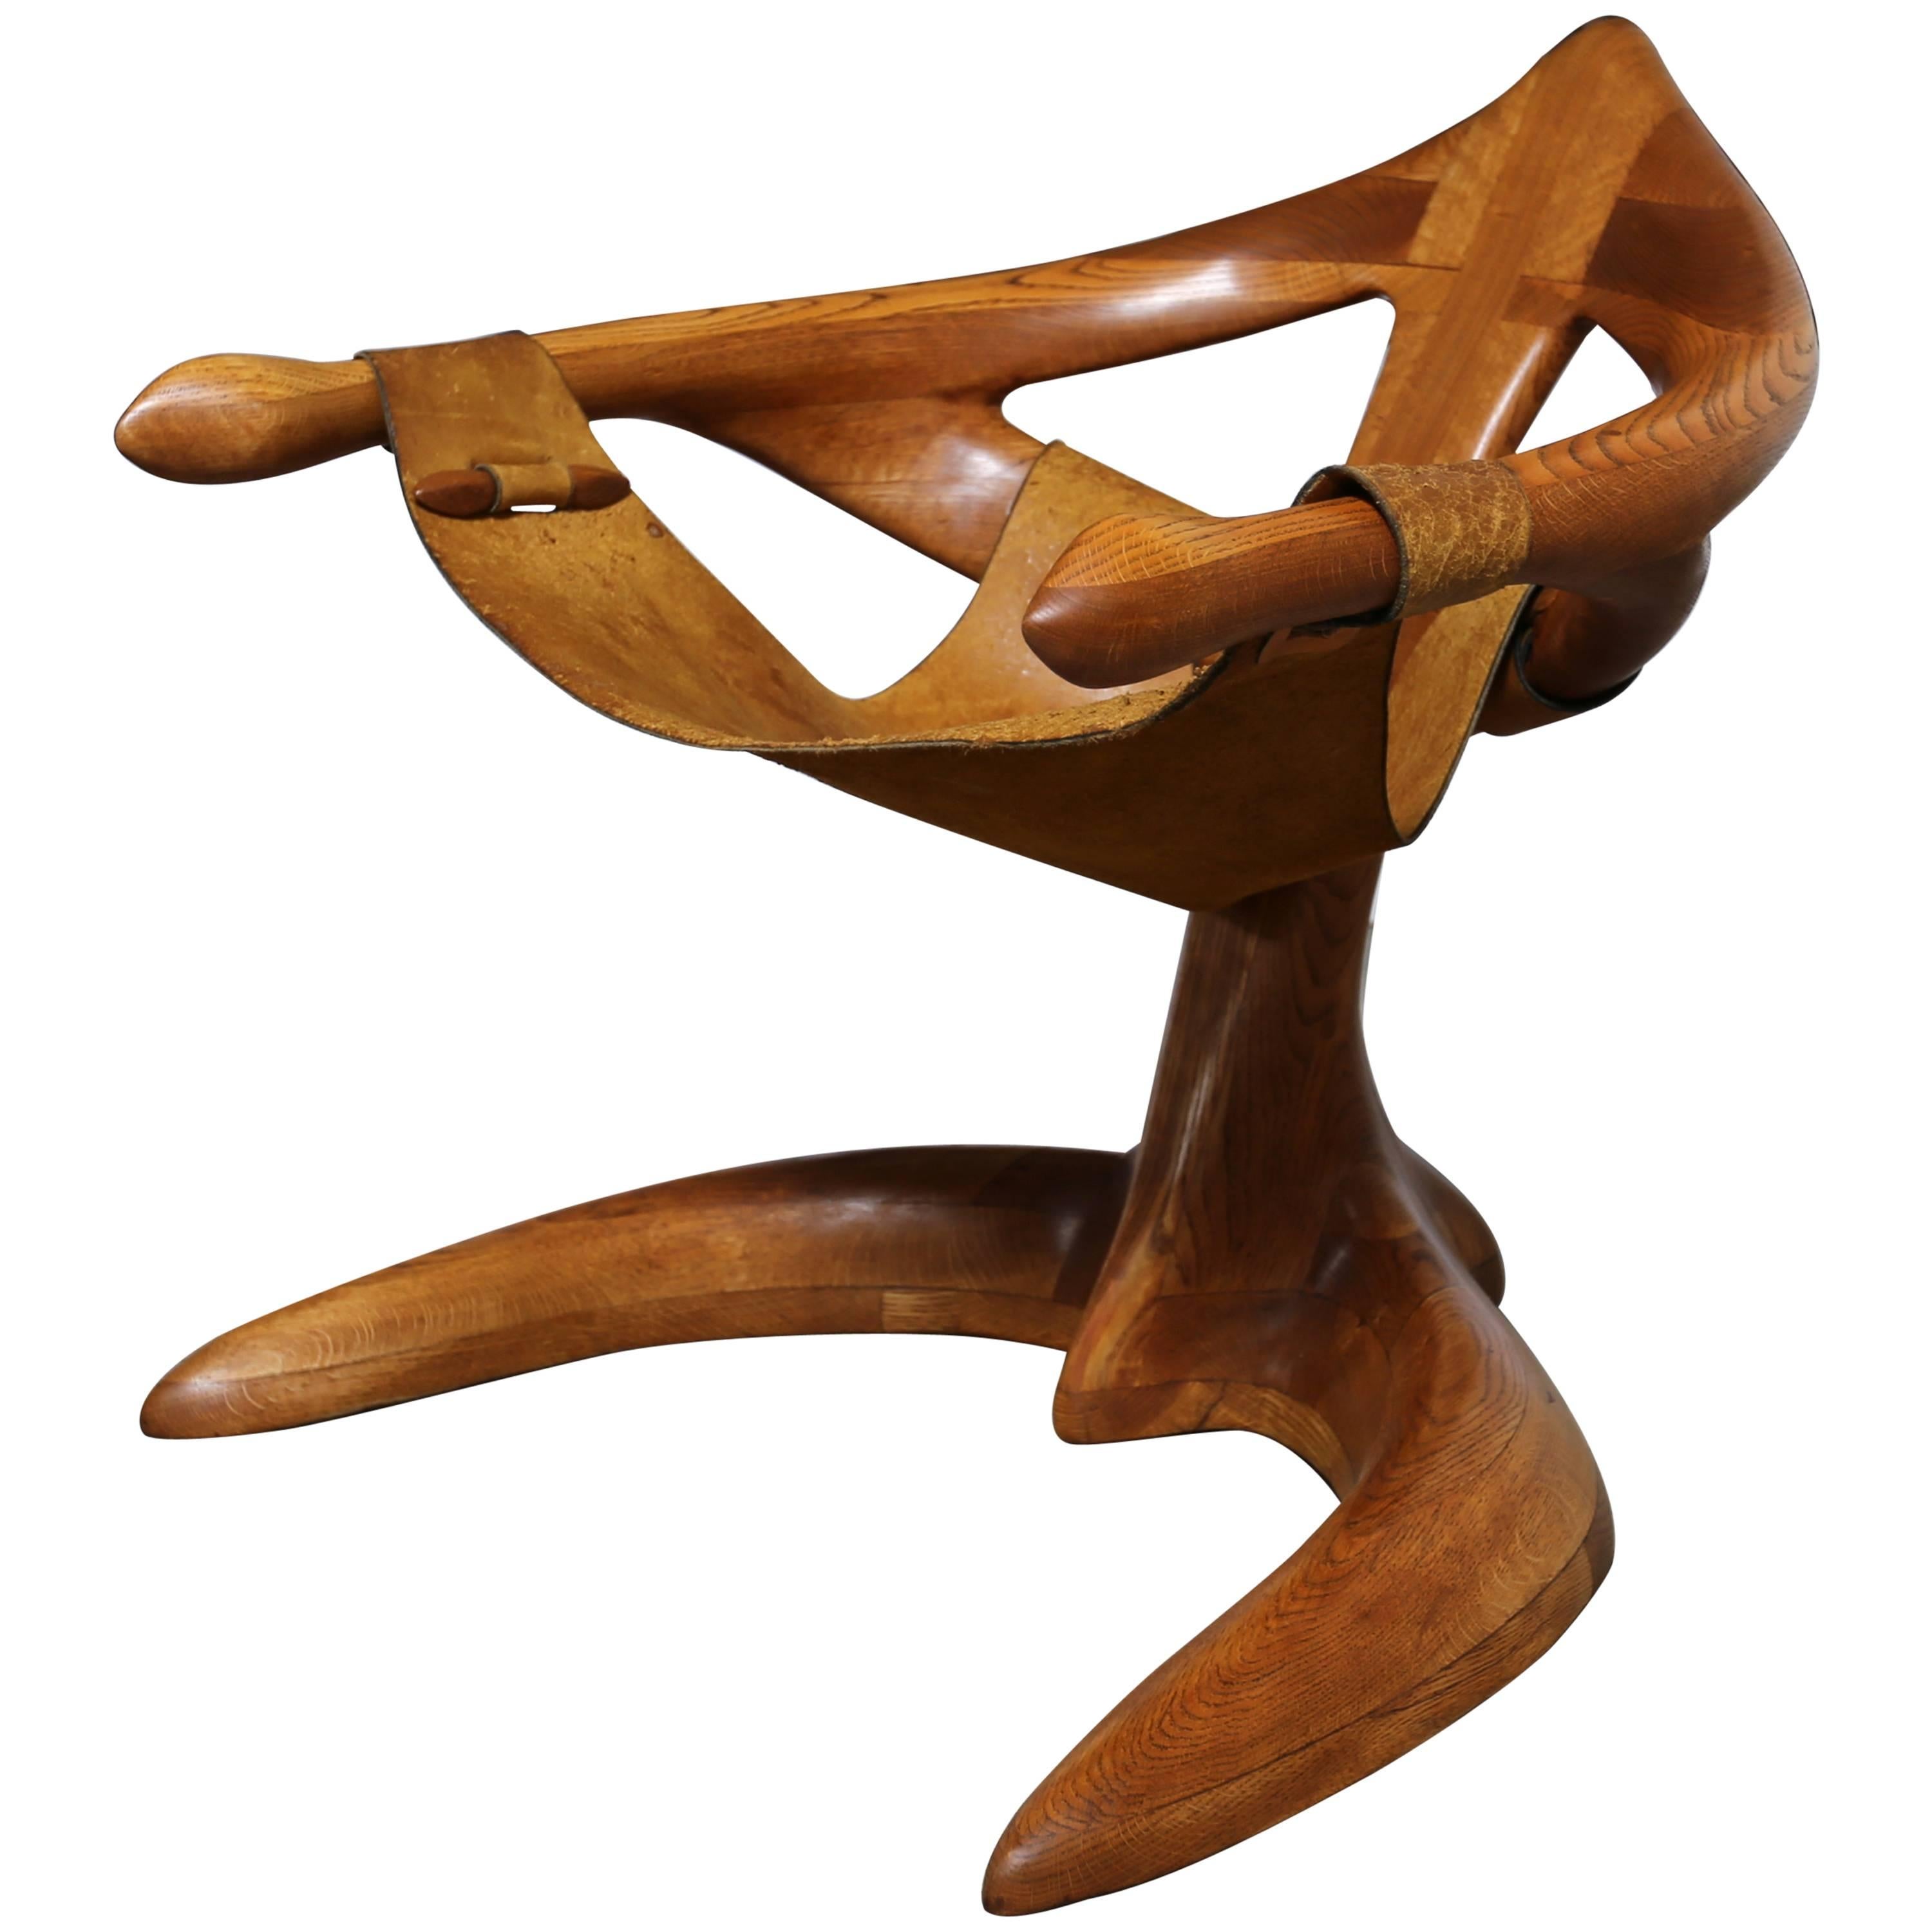 Studio Crafted Lounge Chair by Californian Woodworker Tim Crowder = MOVING SALE!